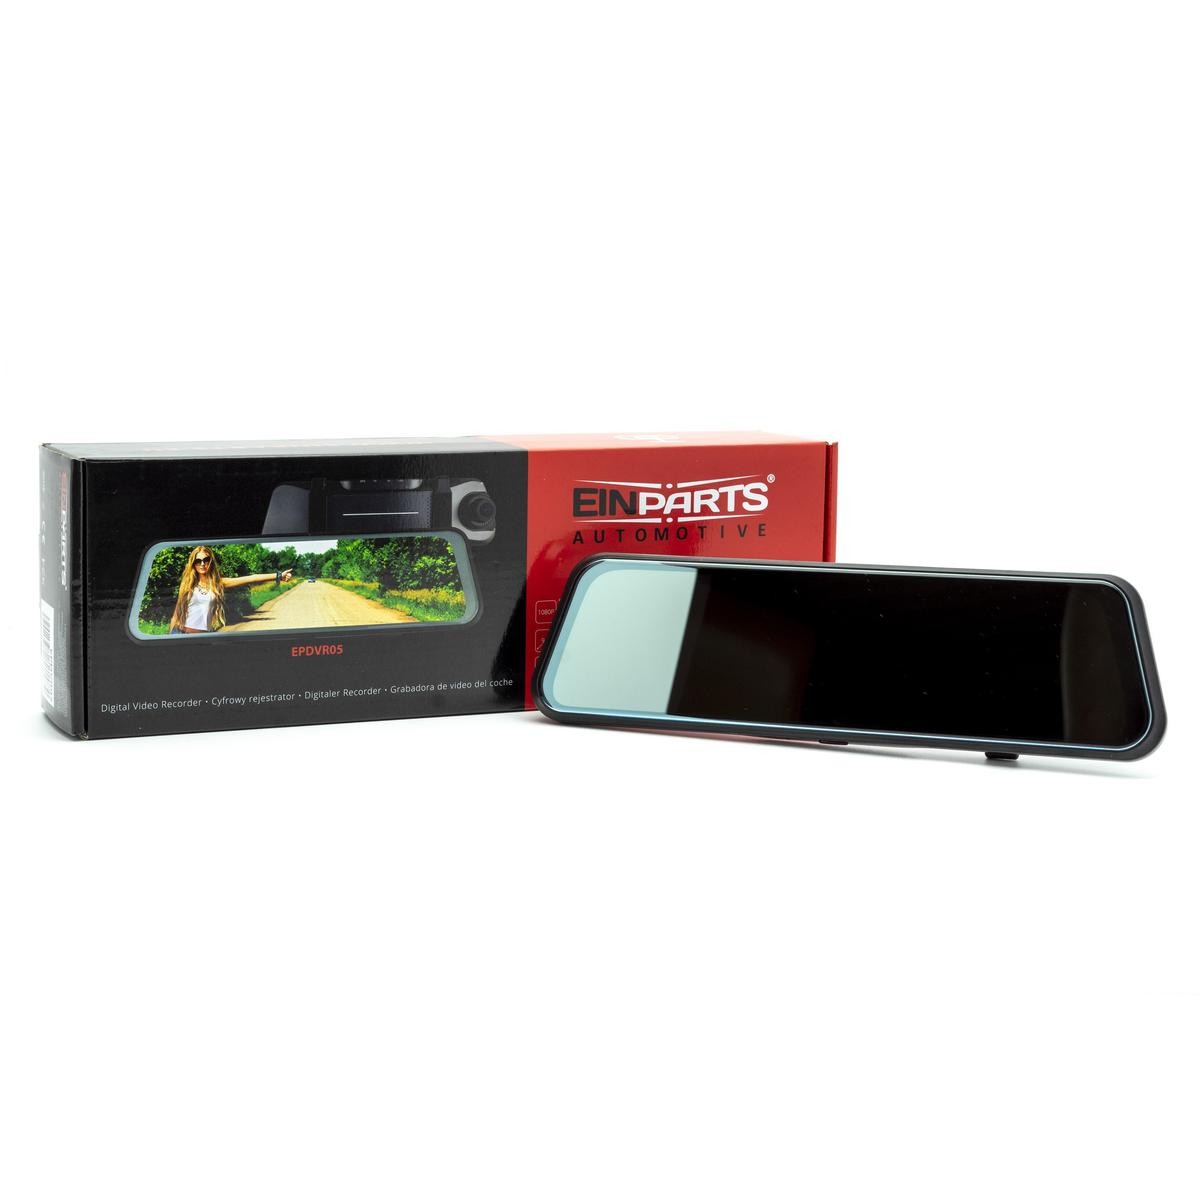 EINPARTS EPDVR05 In-car cameras BMW 3 Coupe (E36) 9.6 Inch, 1080p, Viewing Angle 170°